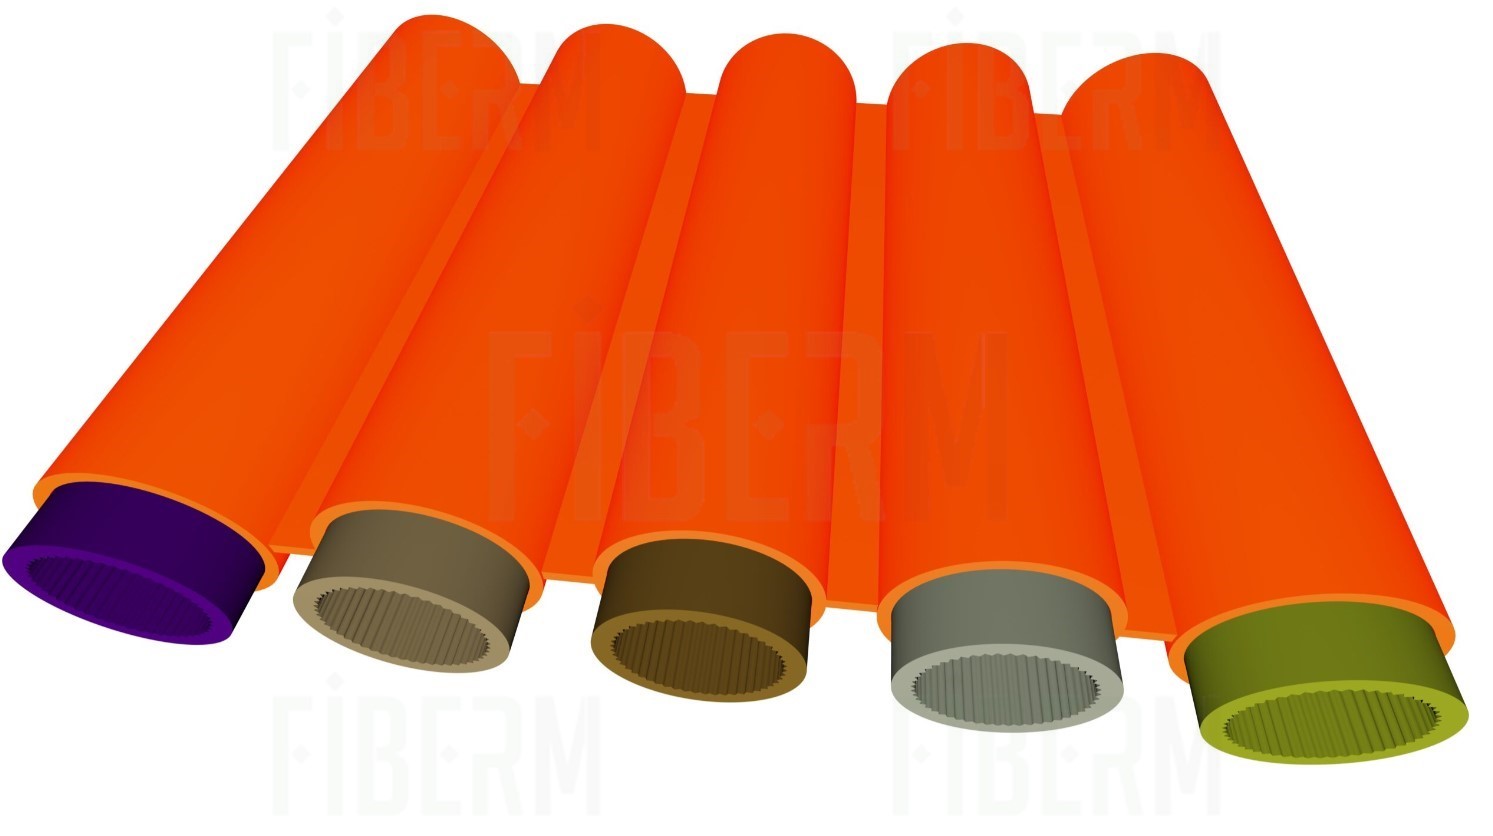 Flat Bundle / Package of Thick-Walled HDPE Microducts 5 x fi 10/6mm for direct burial installation